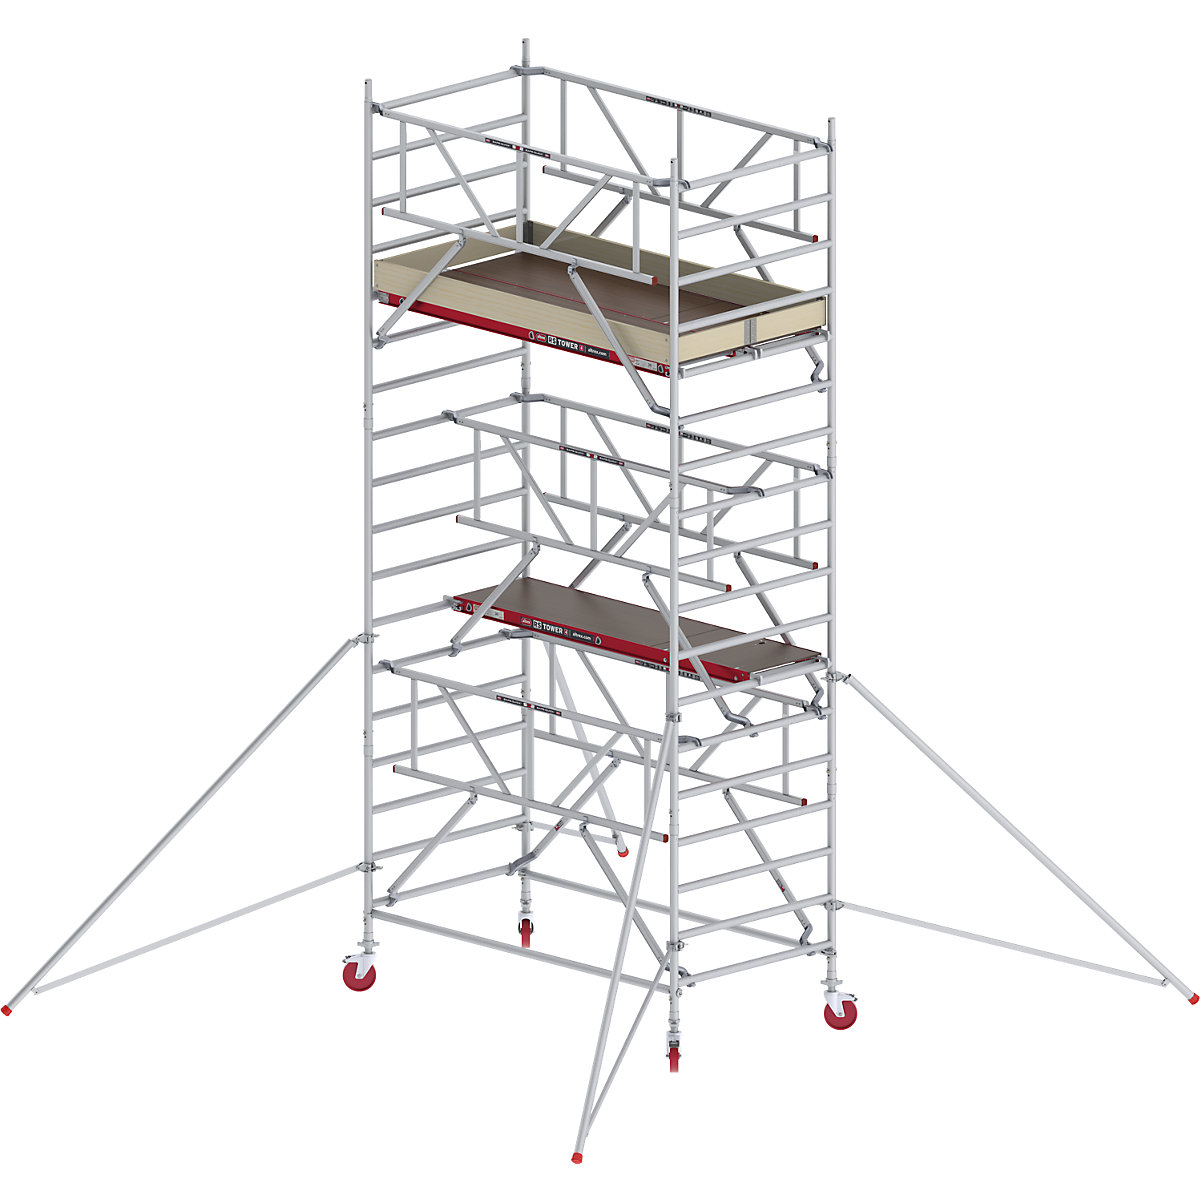 RS TOWER 42 wide mobile access tower with Safe-Quick® – Altrex, wooden platform, length 1.85 m, working height 6.20 m-7